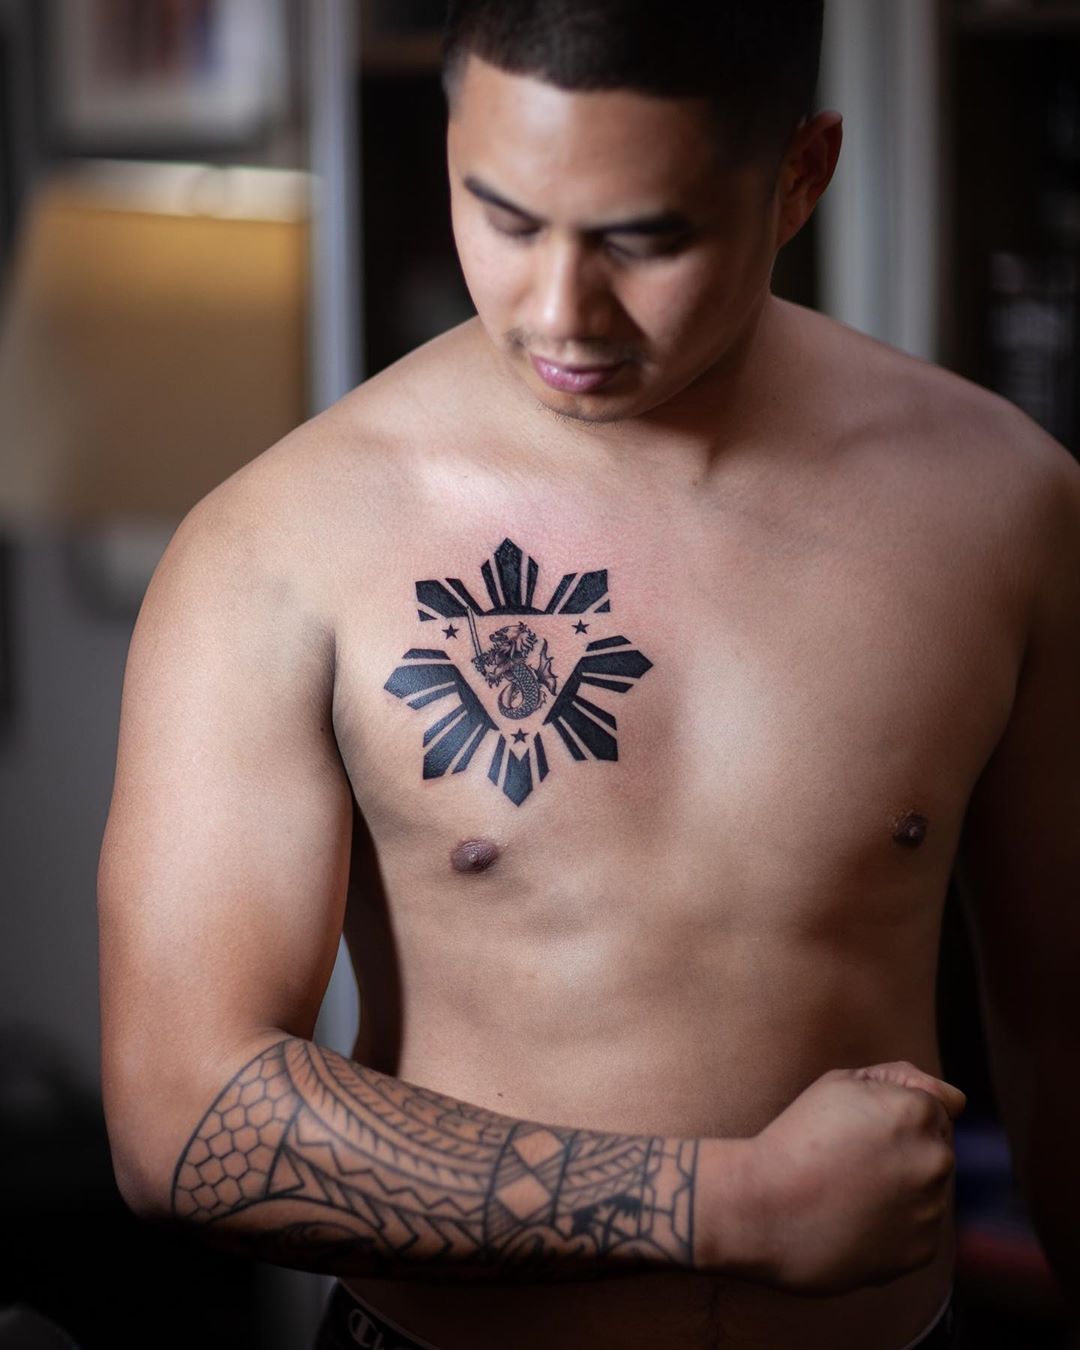 Fiftyfive Tinta Pilipinas  Filipino Tribal 3 stars and a sun tattoo done  by jefftattoos at 55 Tinta Maginhawa Were open today from 1pm till 10pm  55tinta 55tintapilipinas  Facebook